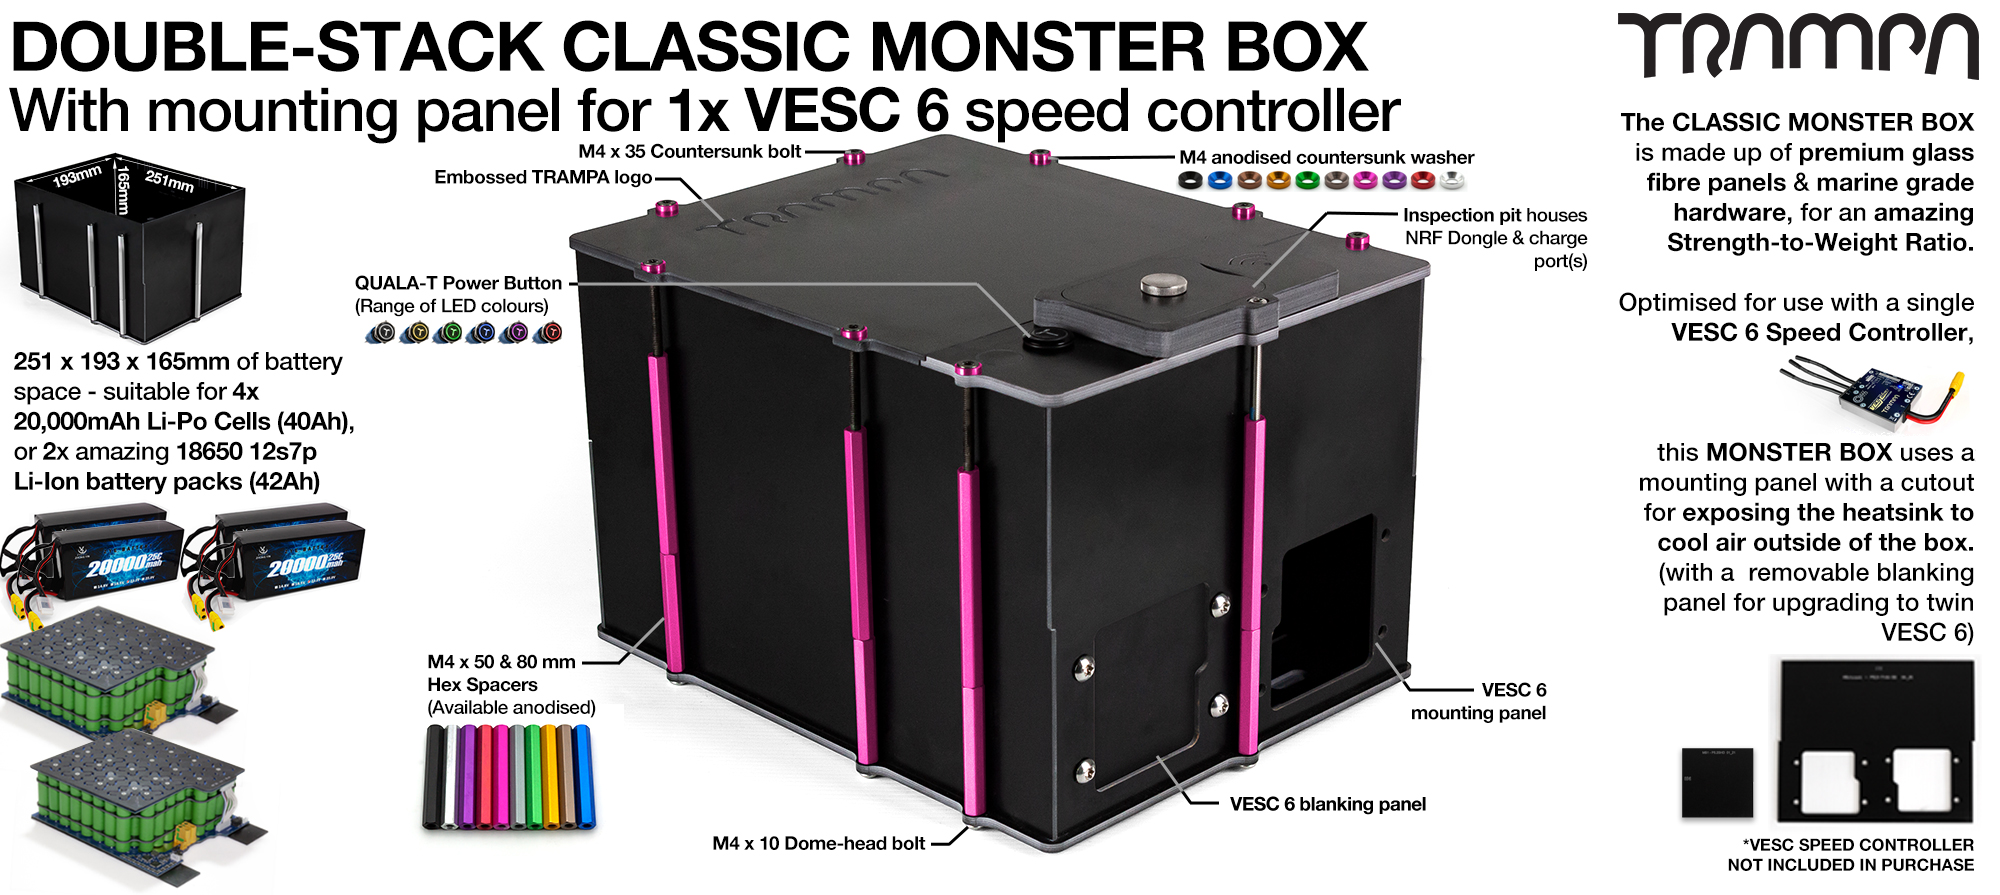 Classic MONSTER Box MkV DOUBLE STACKER fits 168x 18650 cells to give 12s14p 42A or 4x22000 mAh Li-Po Cells to give 44mAh & has Panels to fit 1x VESC 6 Internally. 